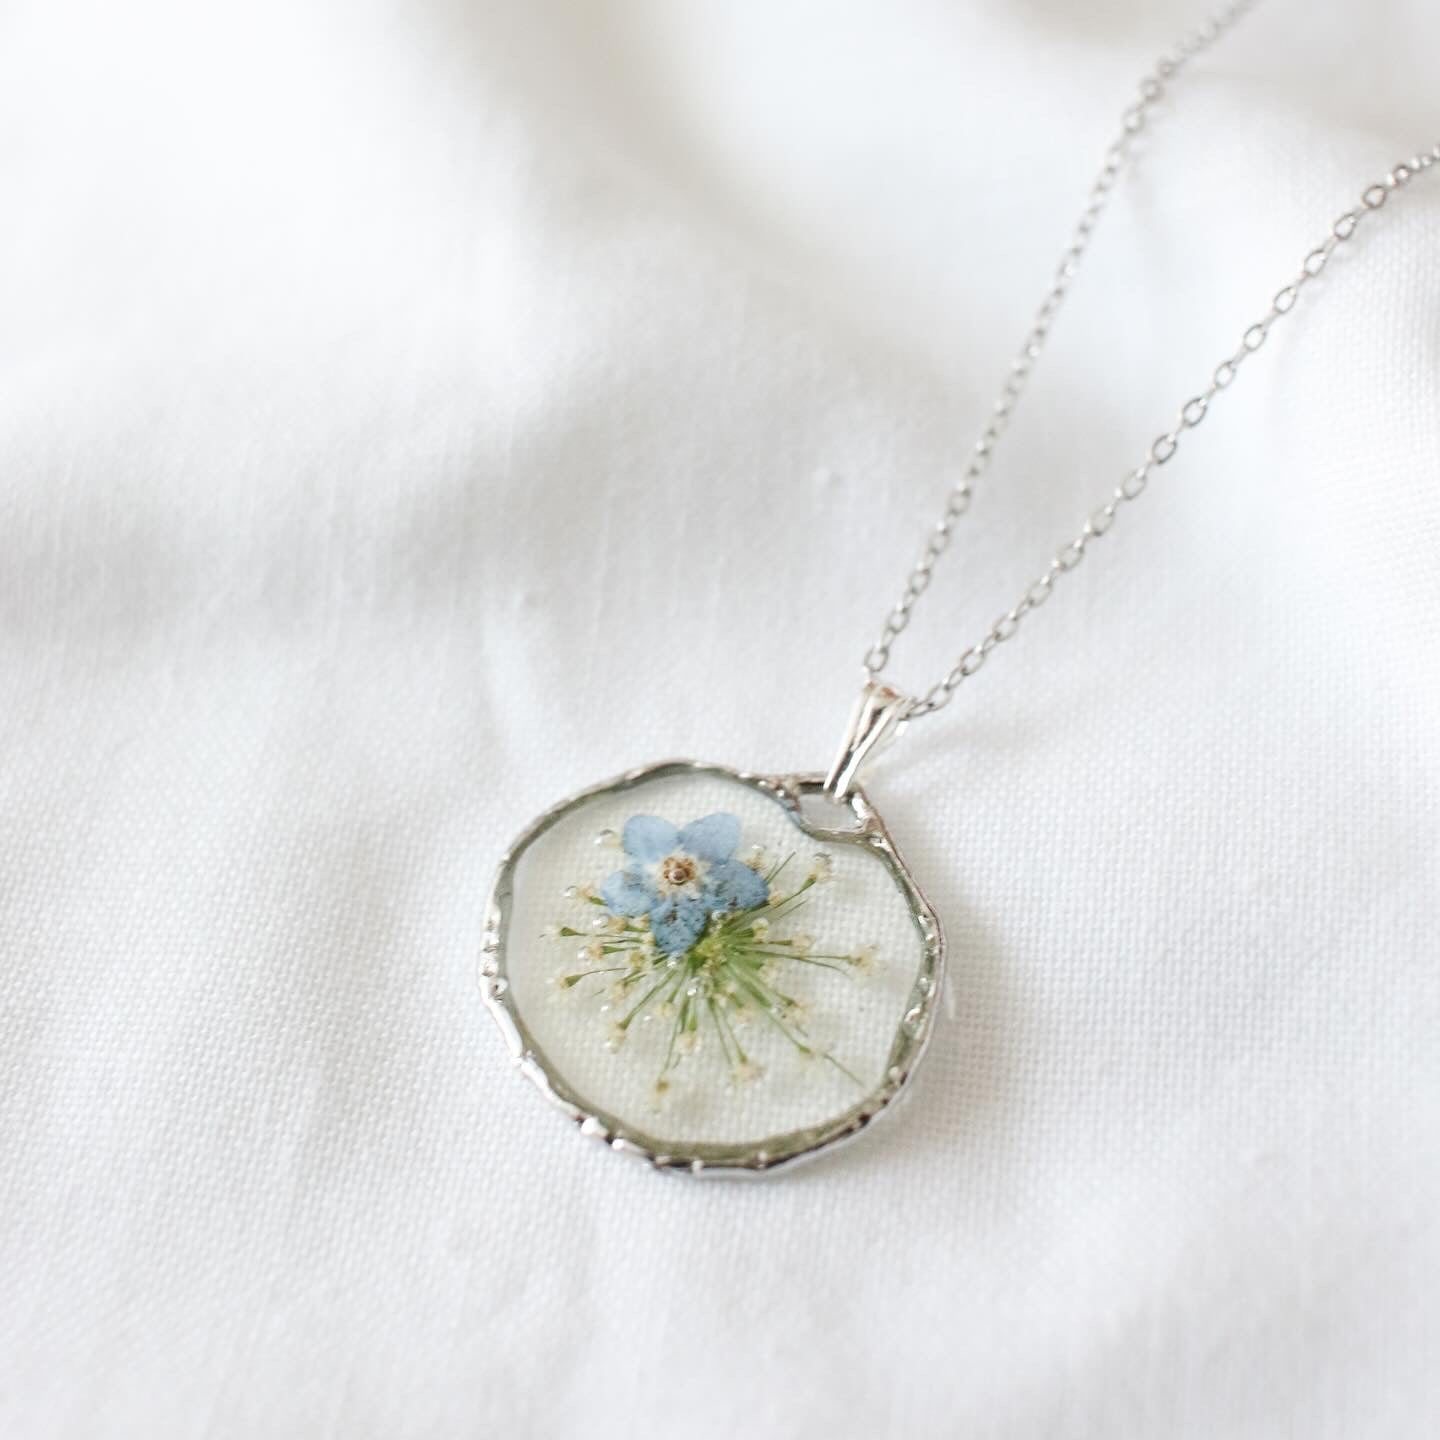 The Trouvaille Blue Forget Me Not Necklace in Silver